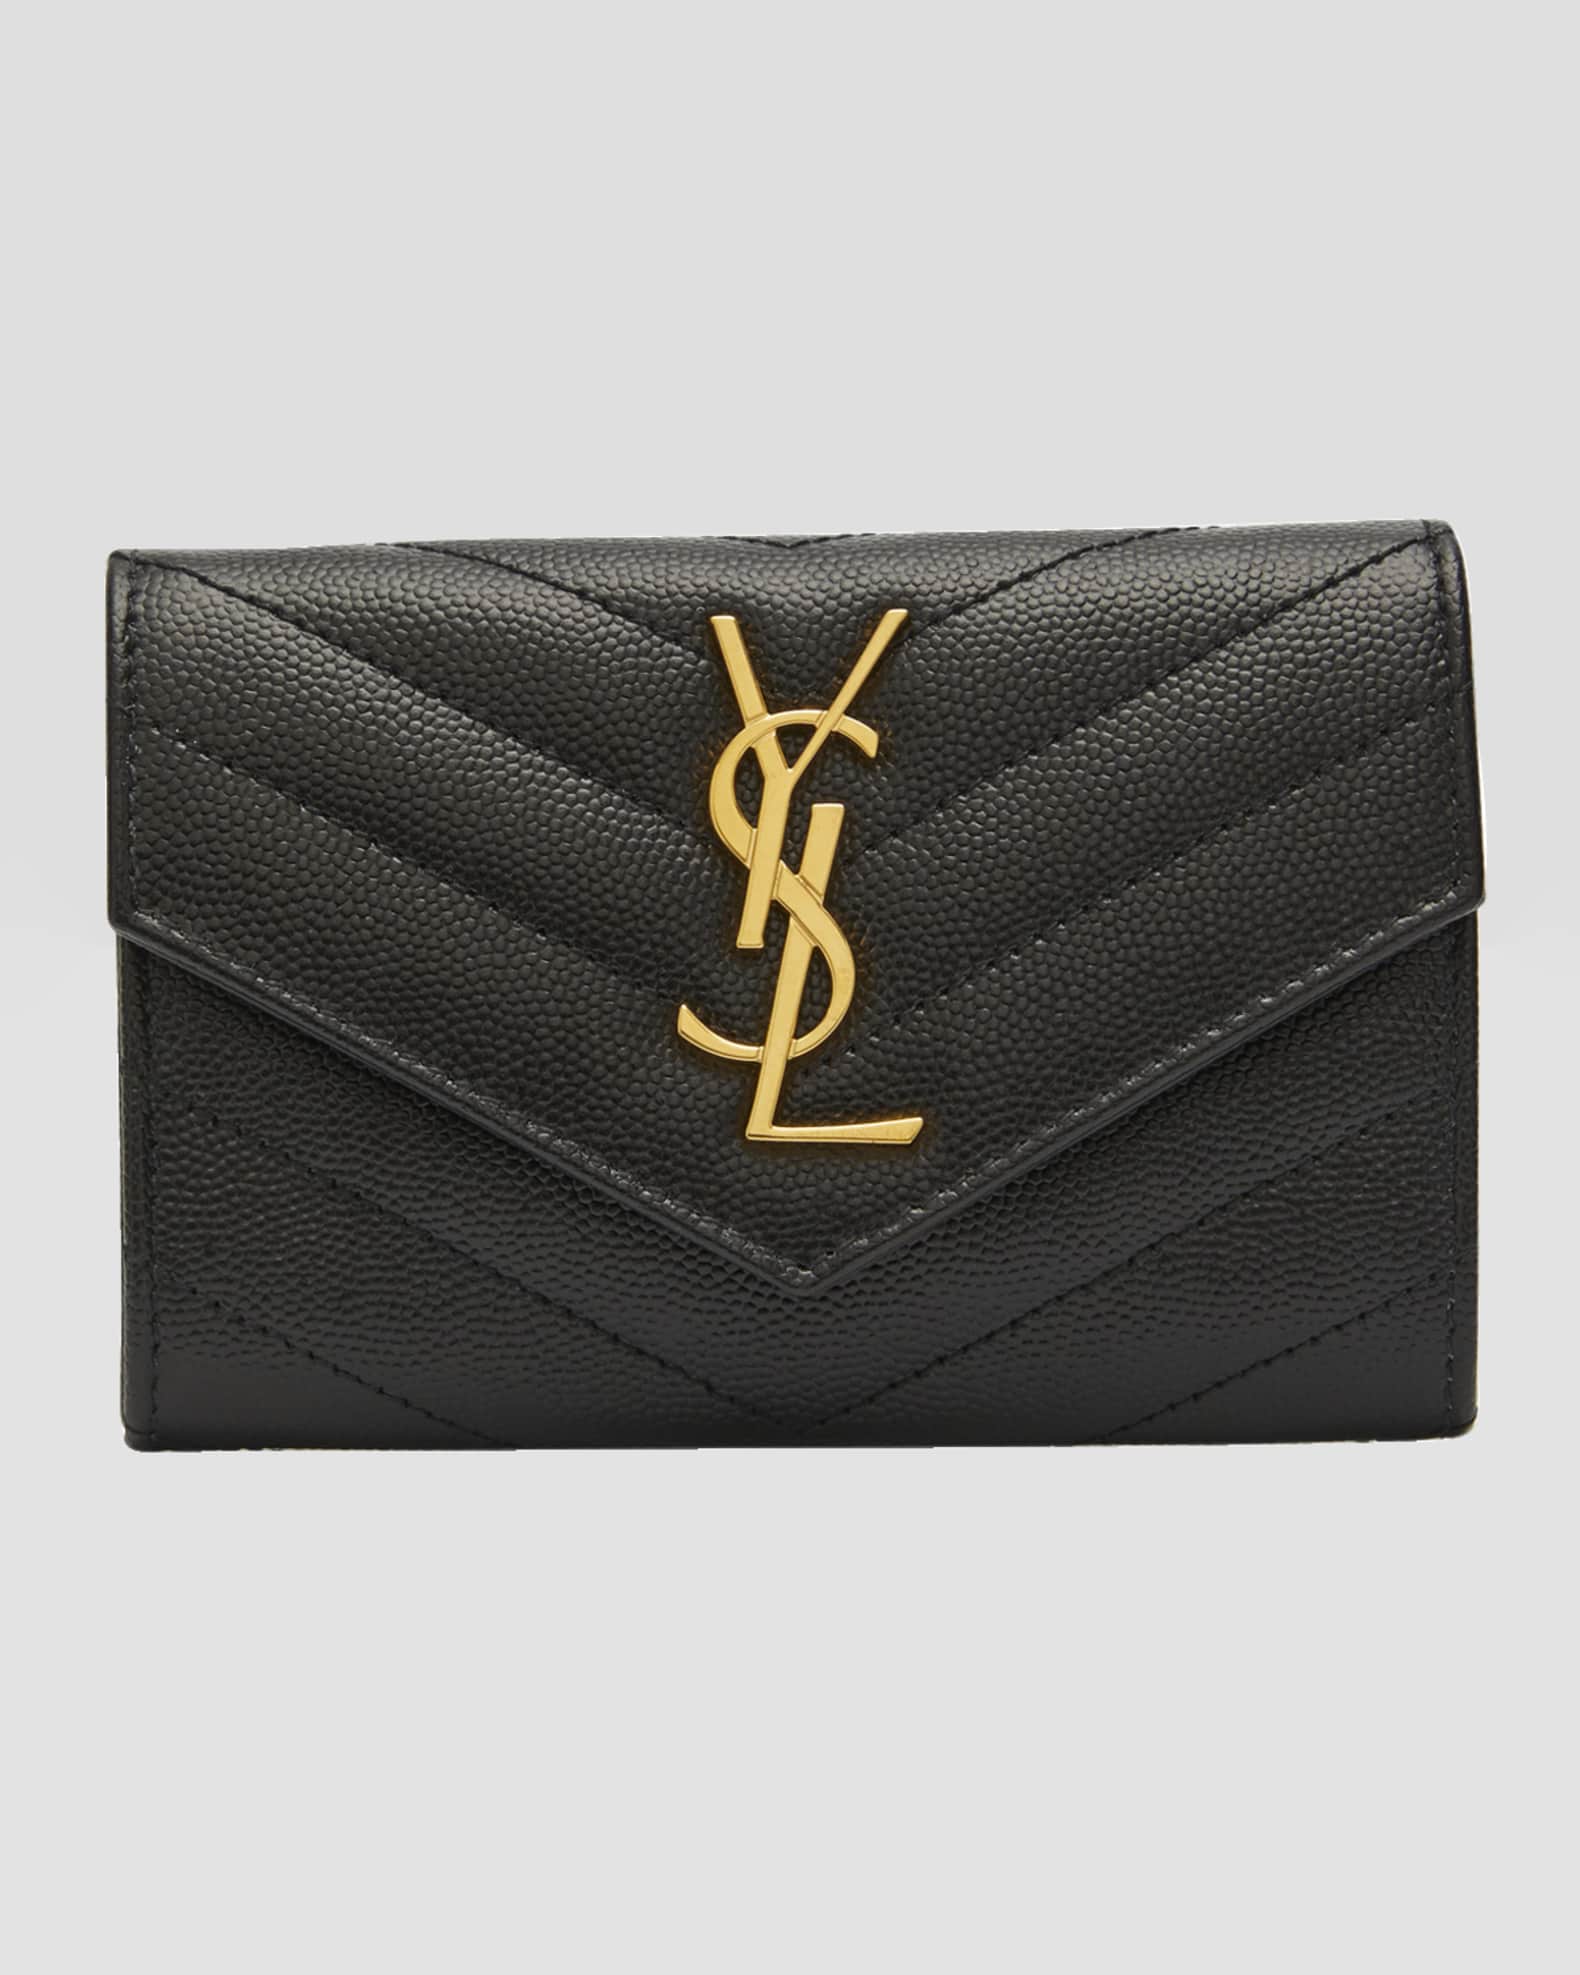 YSL Monogram Small Flap Wallet in Grained Leather | Neiman Marcus